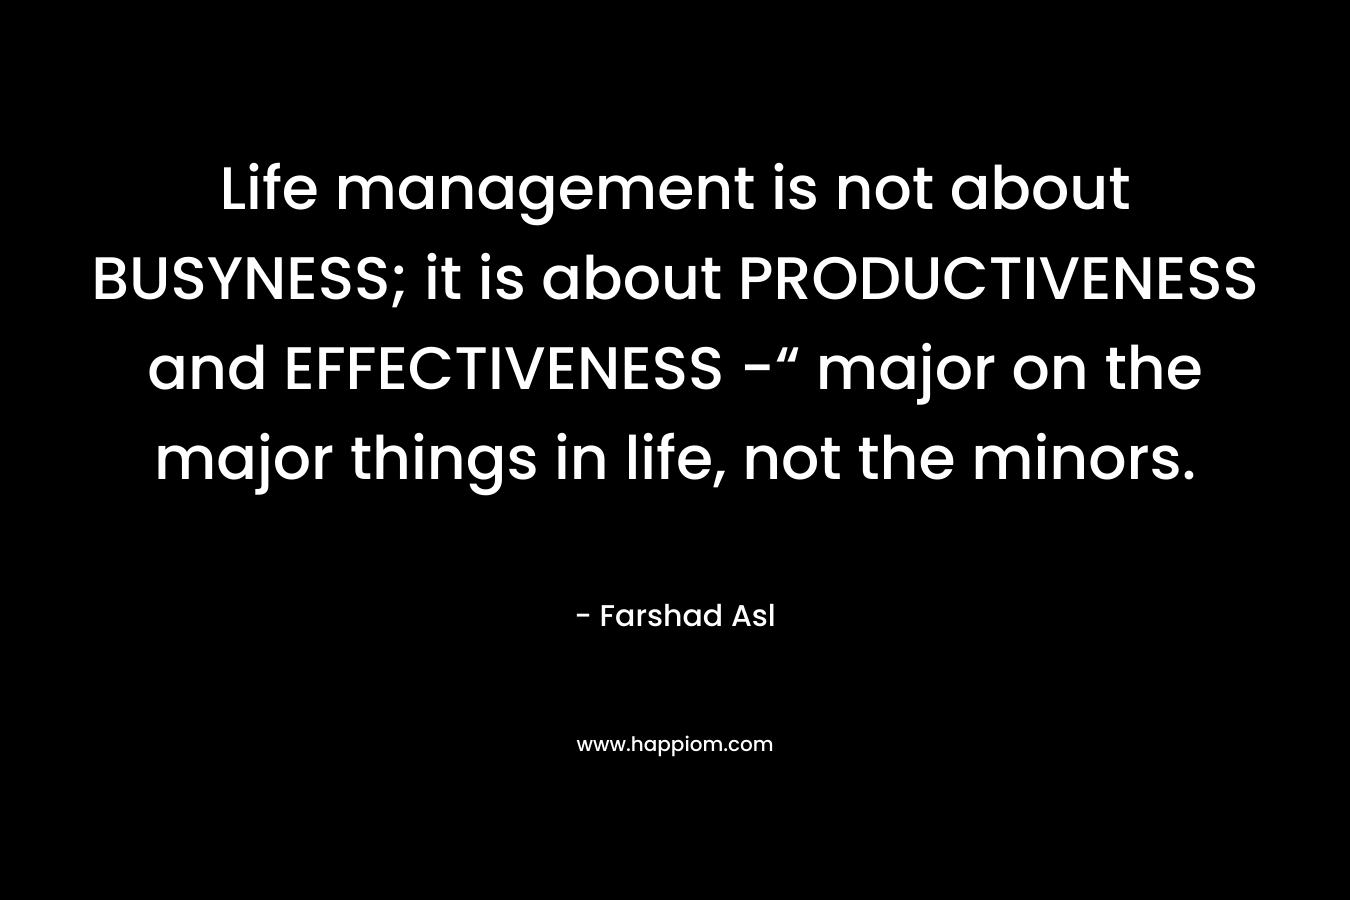 Life management is not about BUSYNESS; it is about PRODUCTIVENESS and EFFECTIVENESS -“ major on the major things in life, not the minors. – Farshad Asl